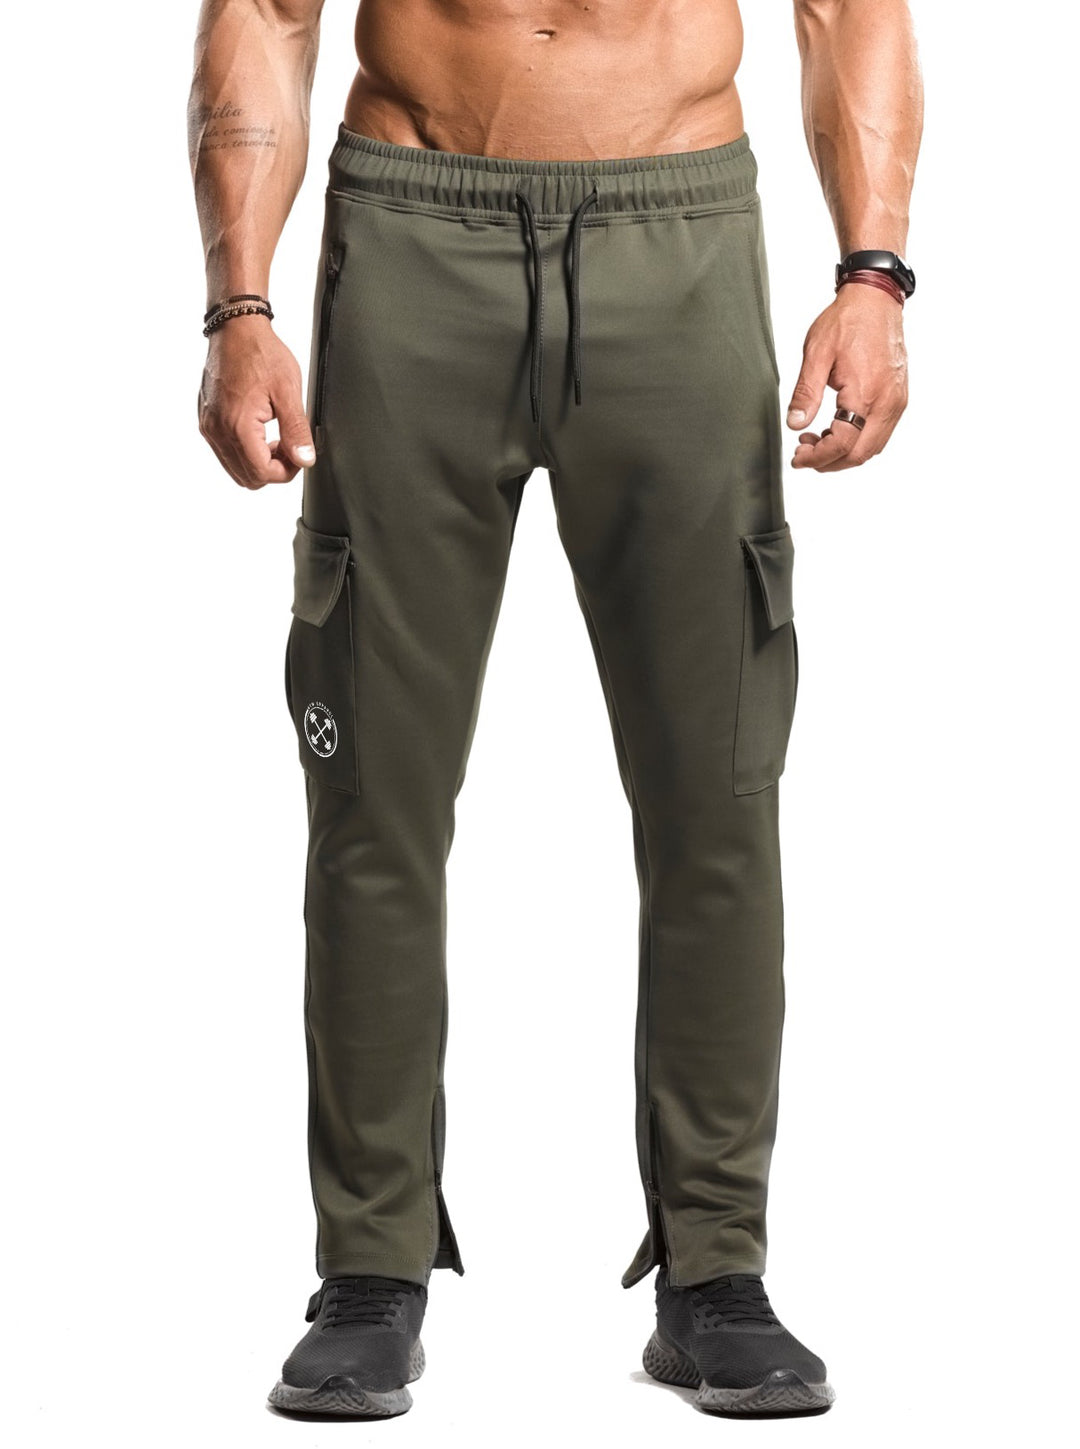 Tapered Cargo Zip Joggers - UPG [Olive Green] - Sweatpants/Joggers - Gym Apparel Egypt